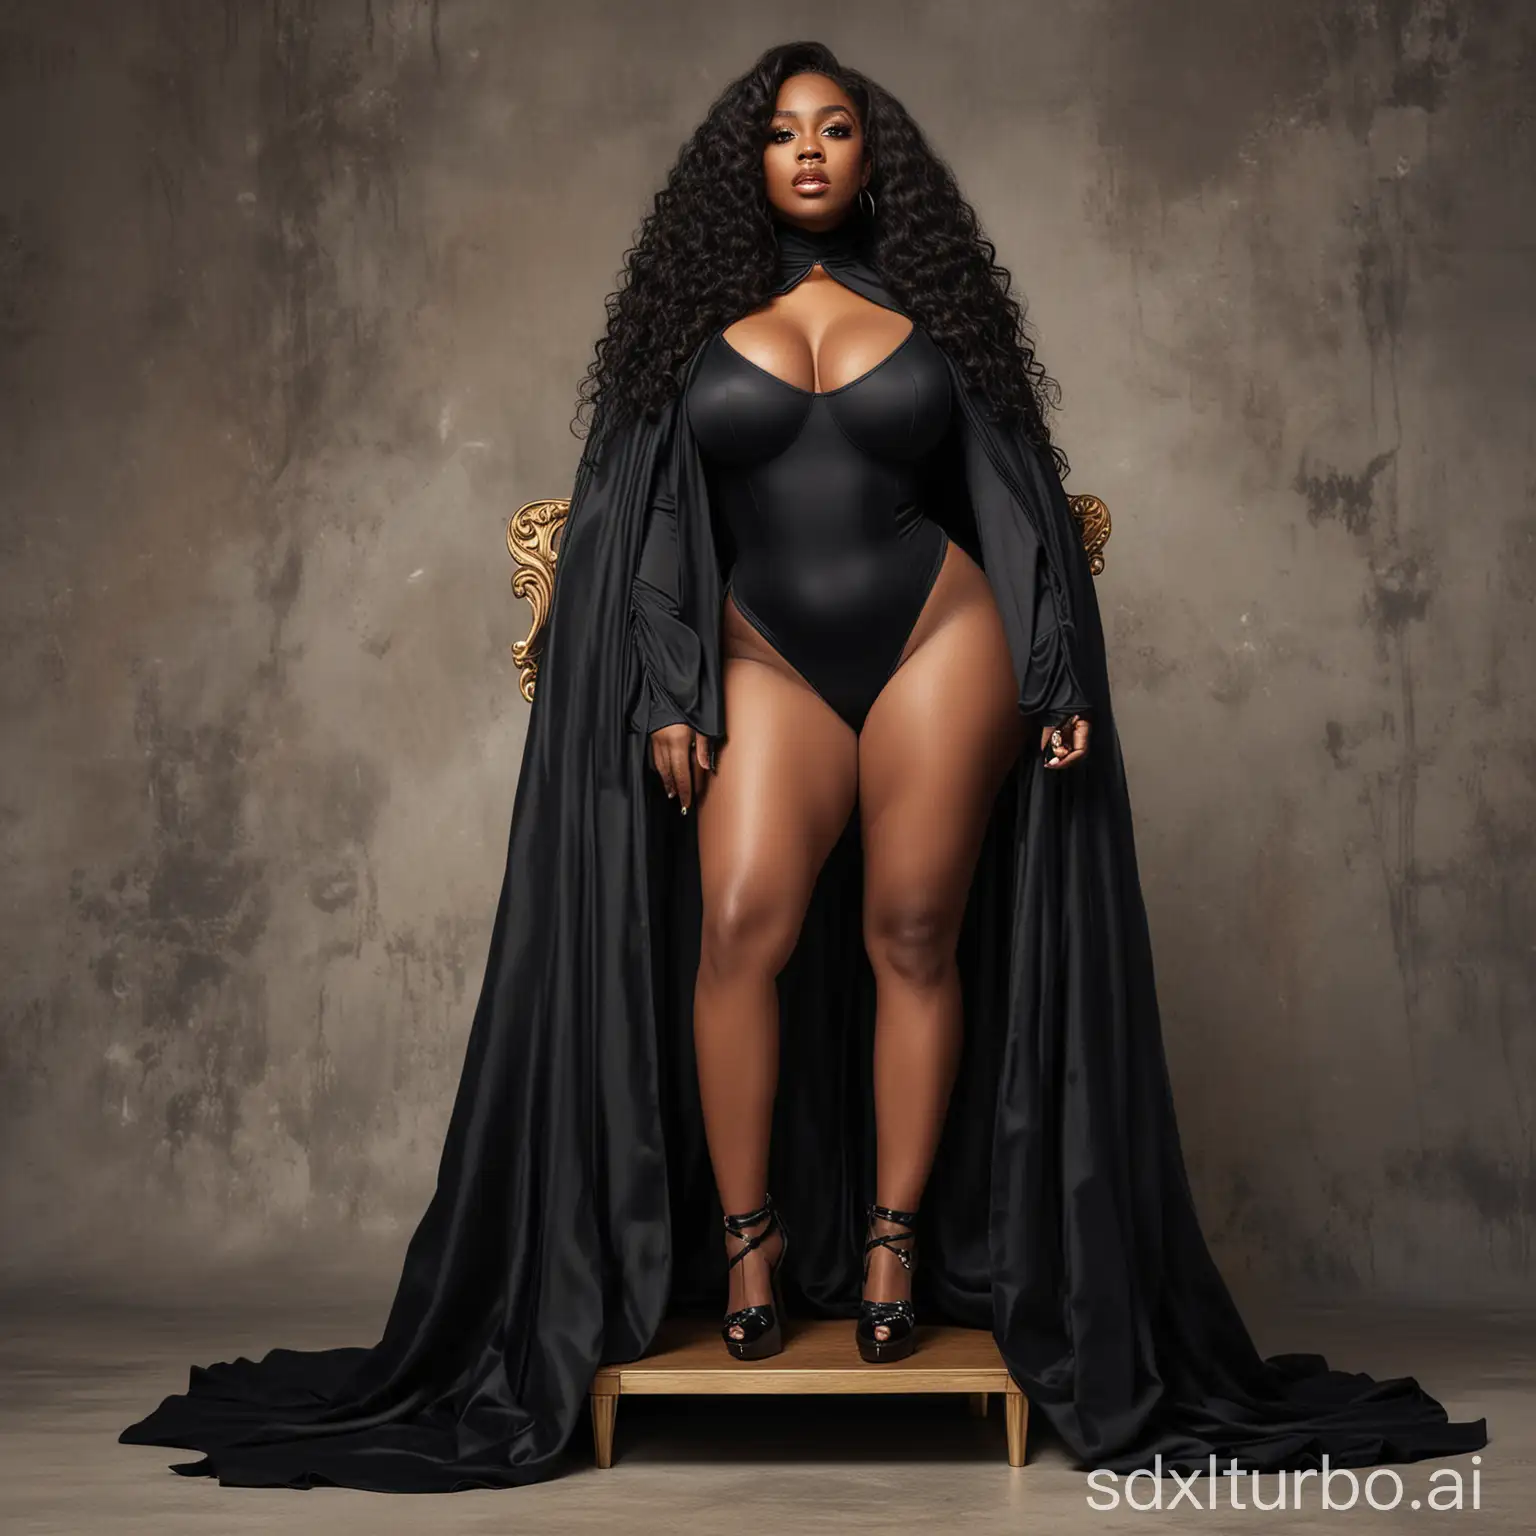 black woman, large breasts, long curly hair, wears black cape with hig collar , wears hig heels , sitting a elevated trone 